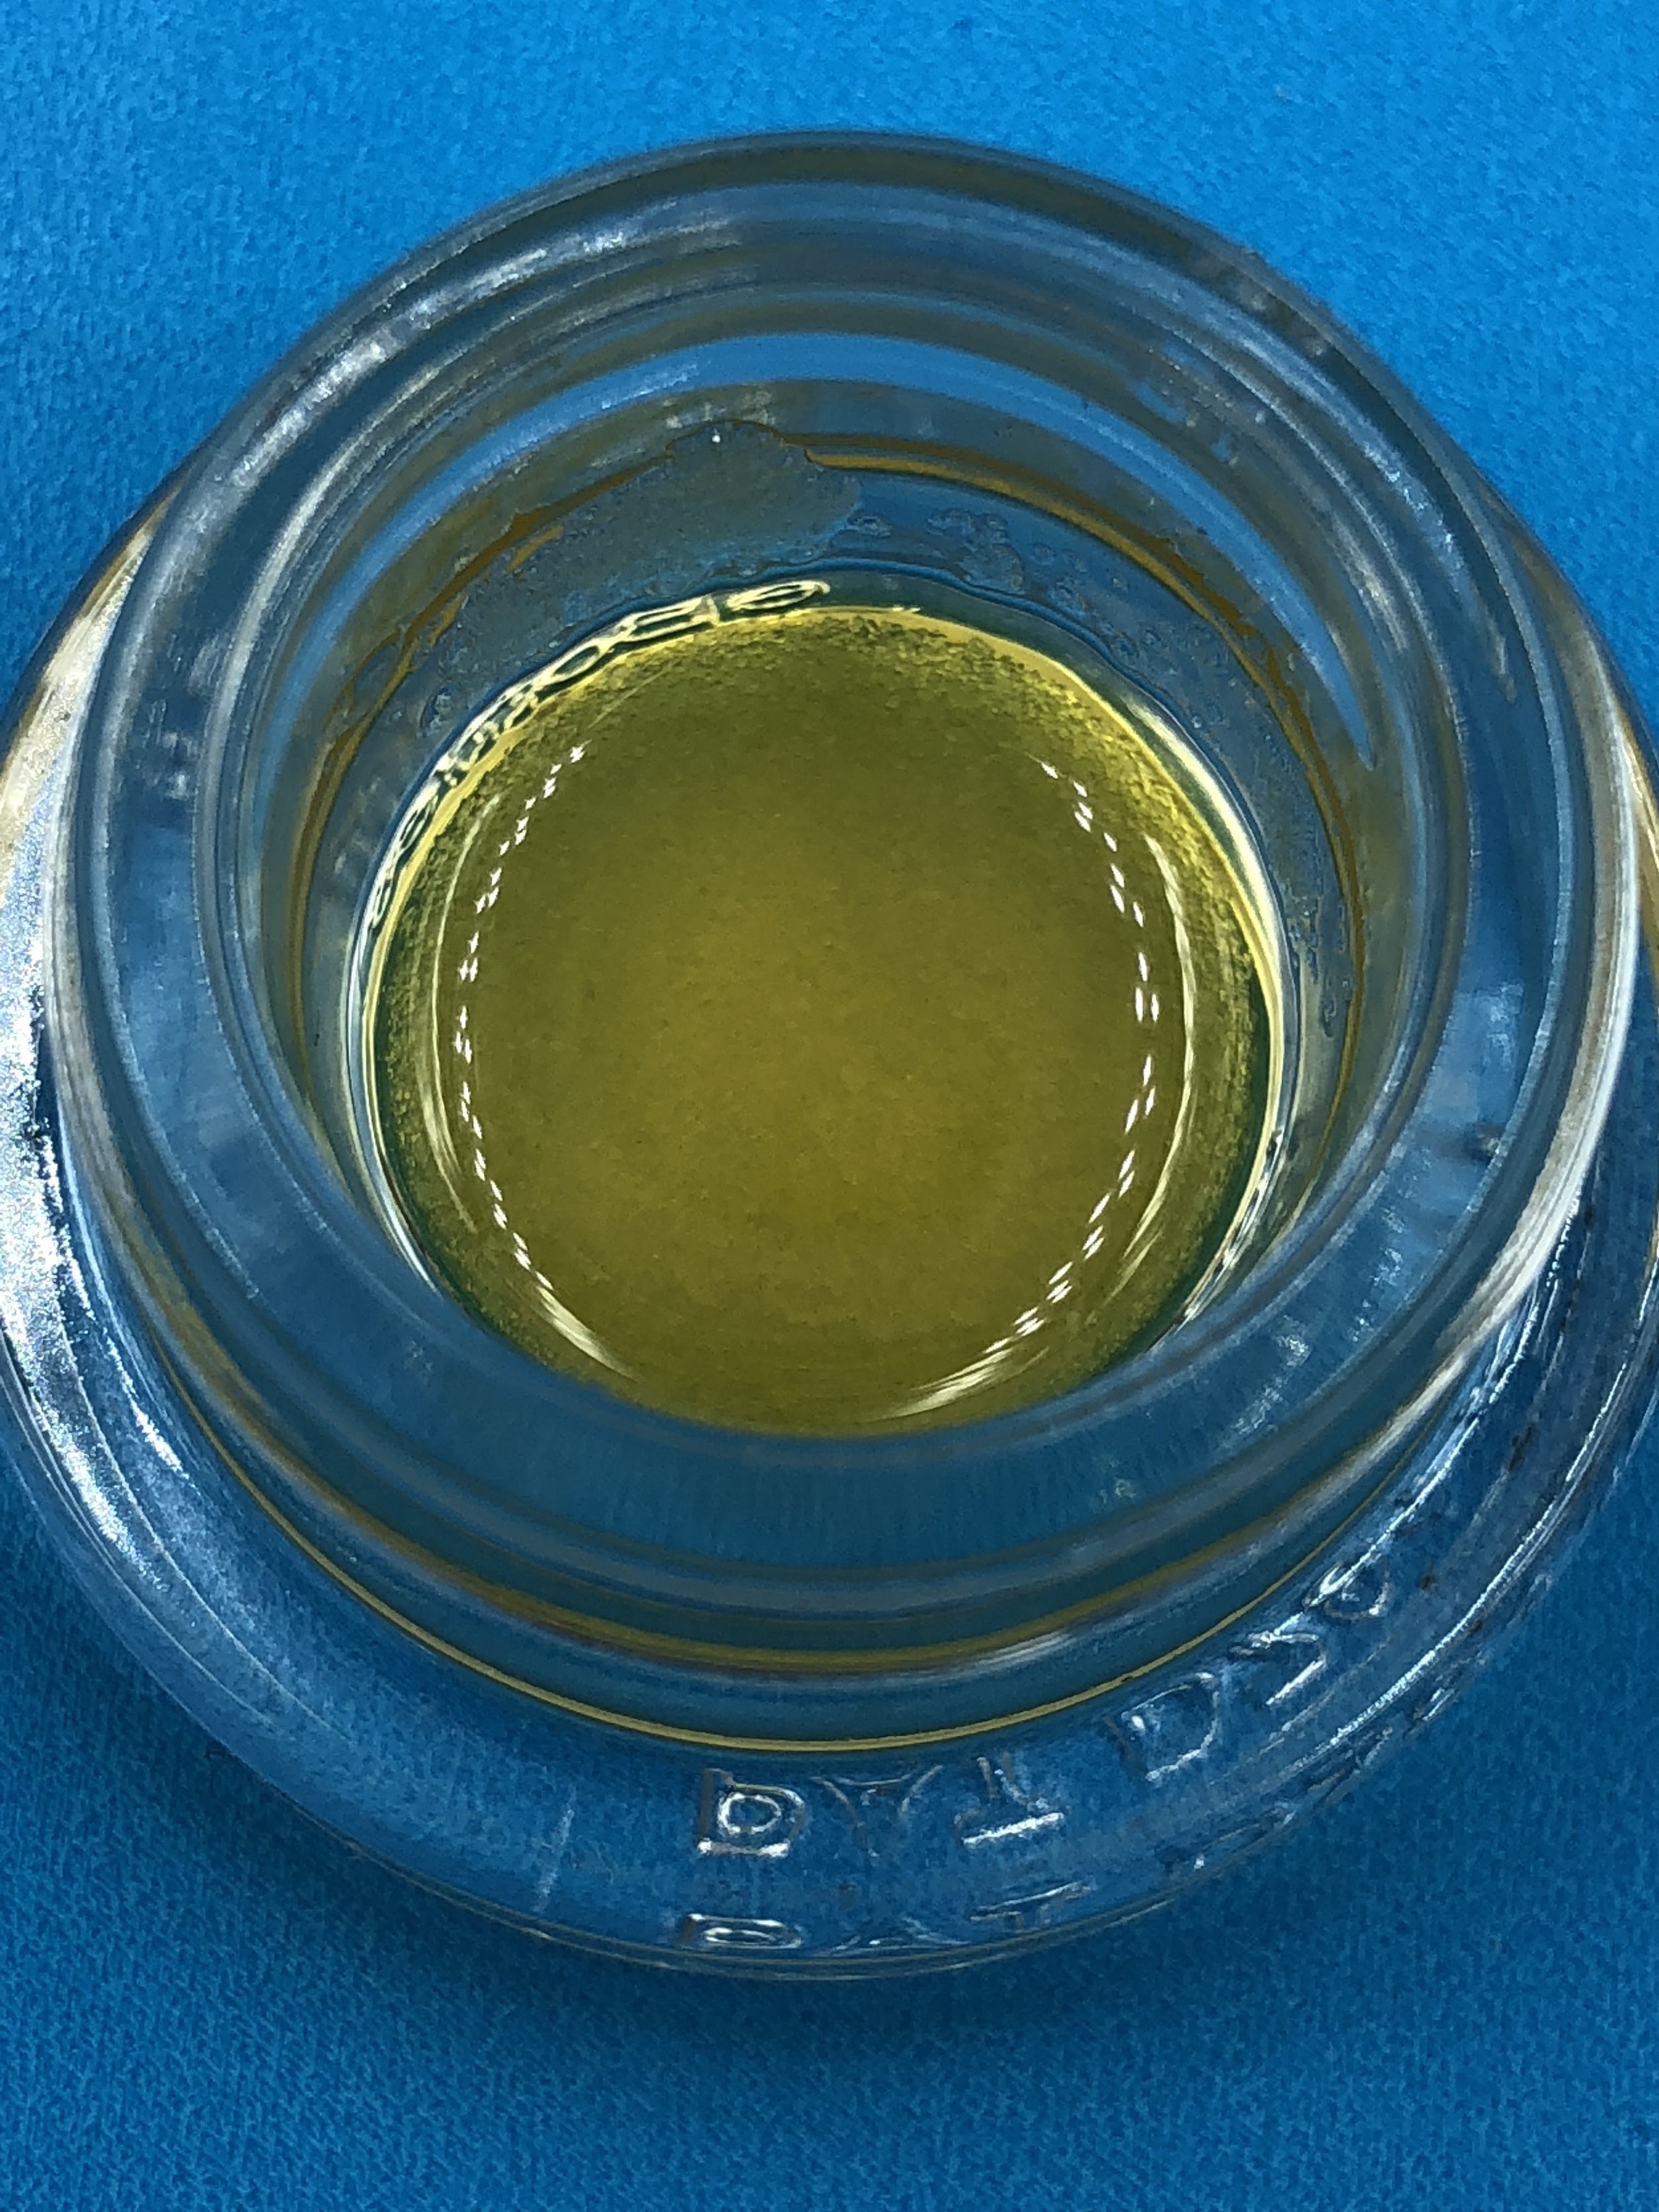 concentrate-arcturus-blueberry-kush-live-resin-sauce